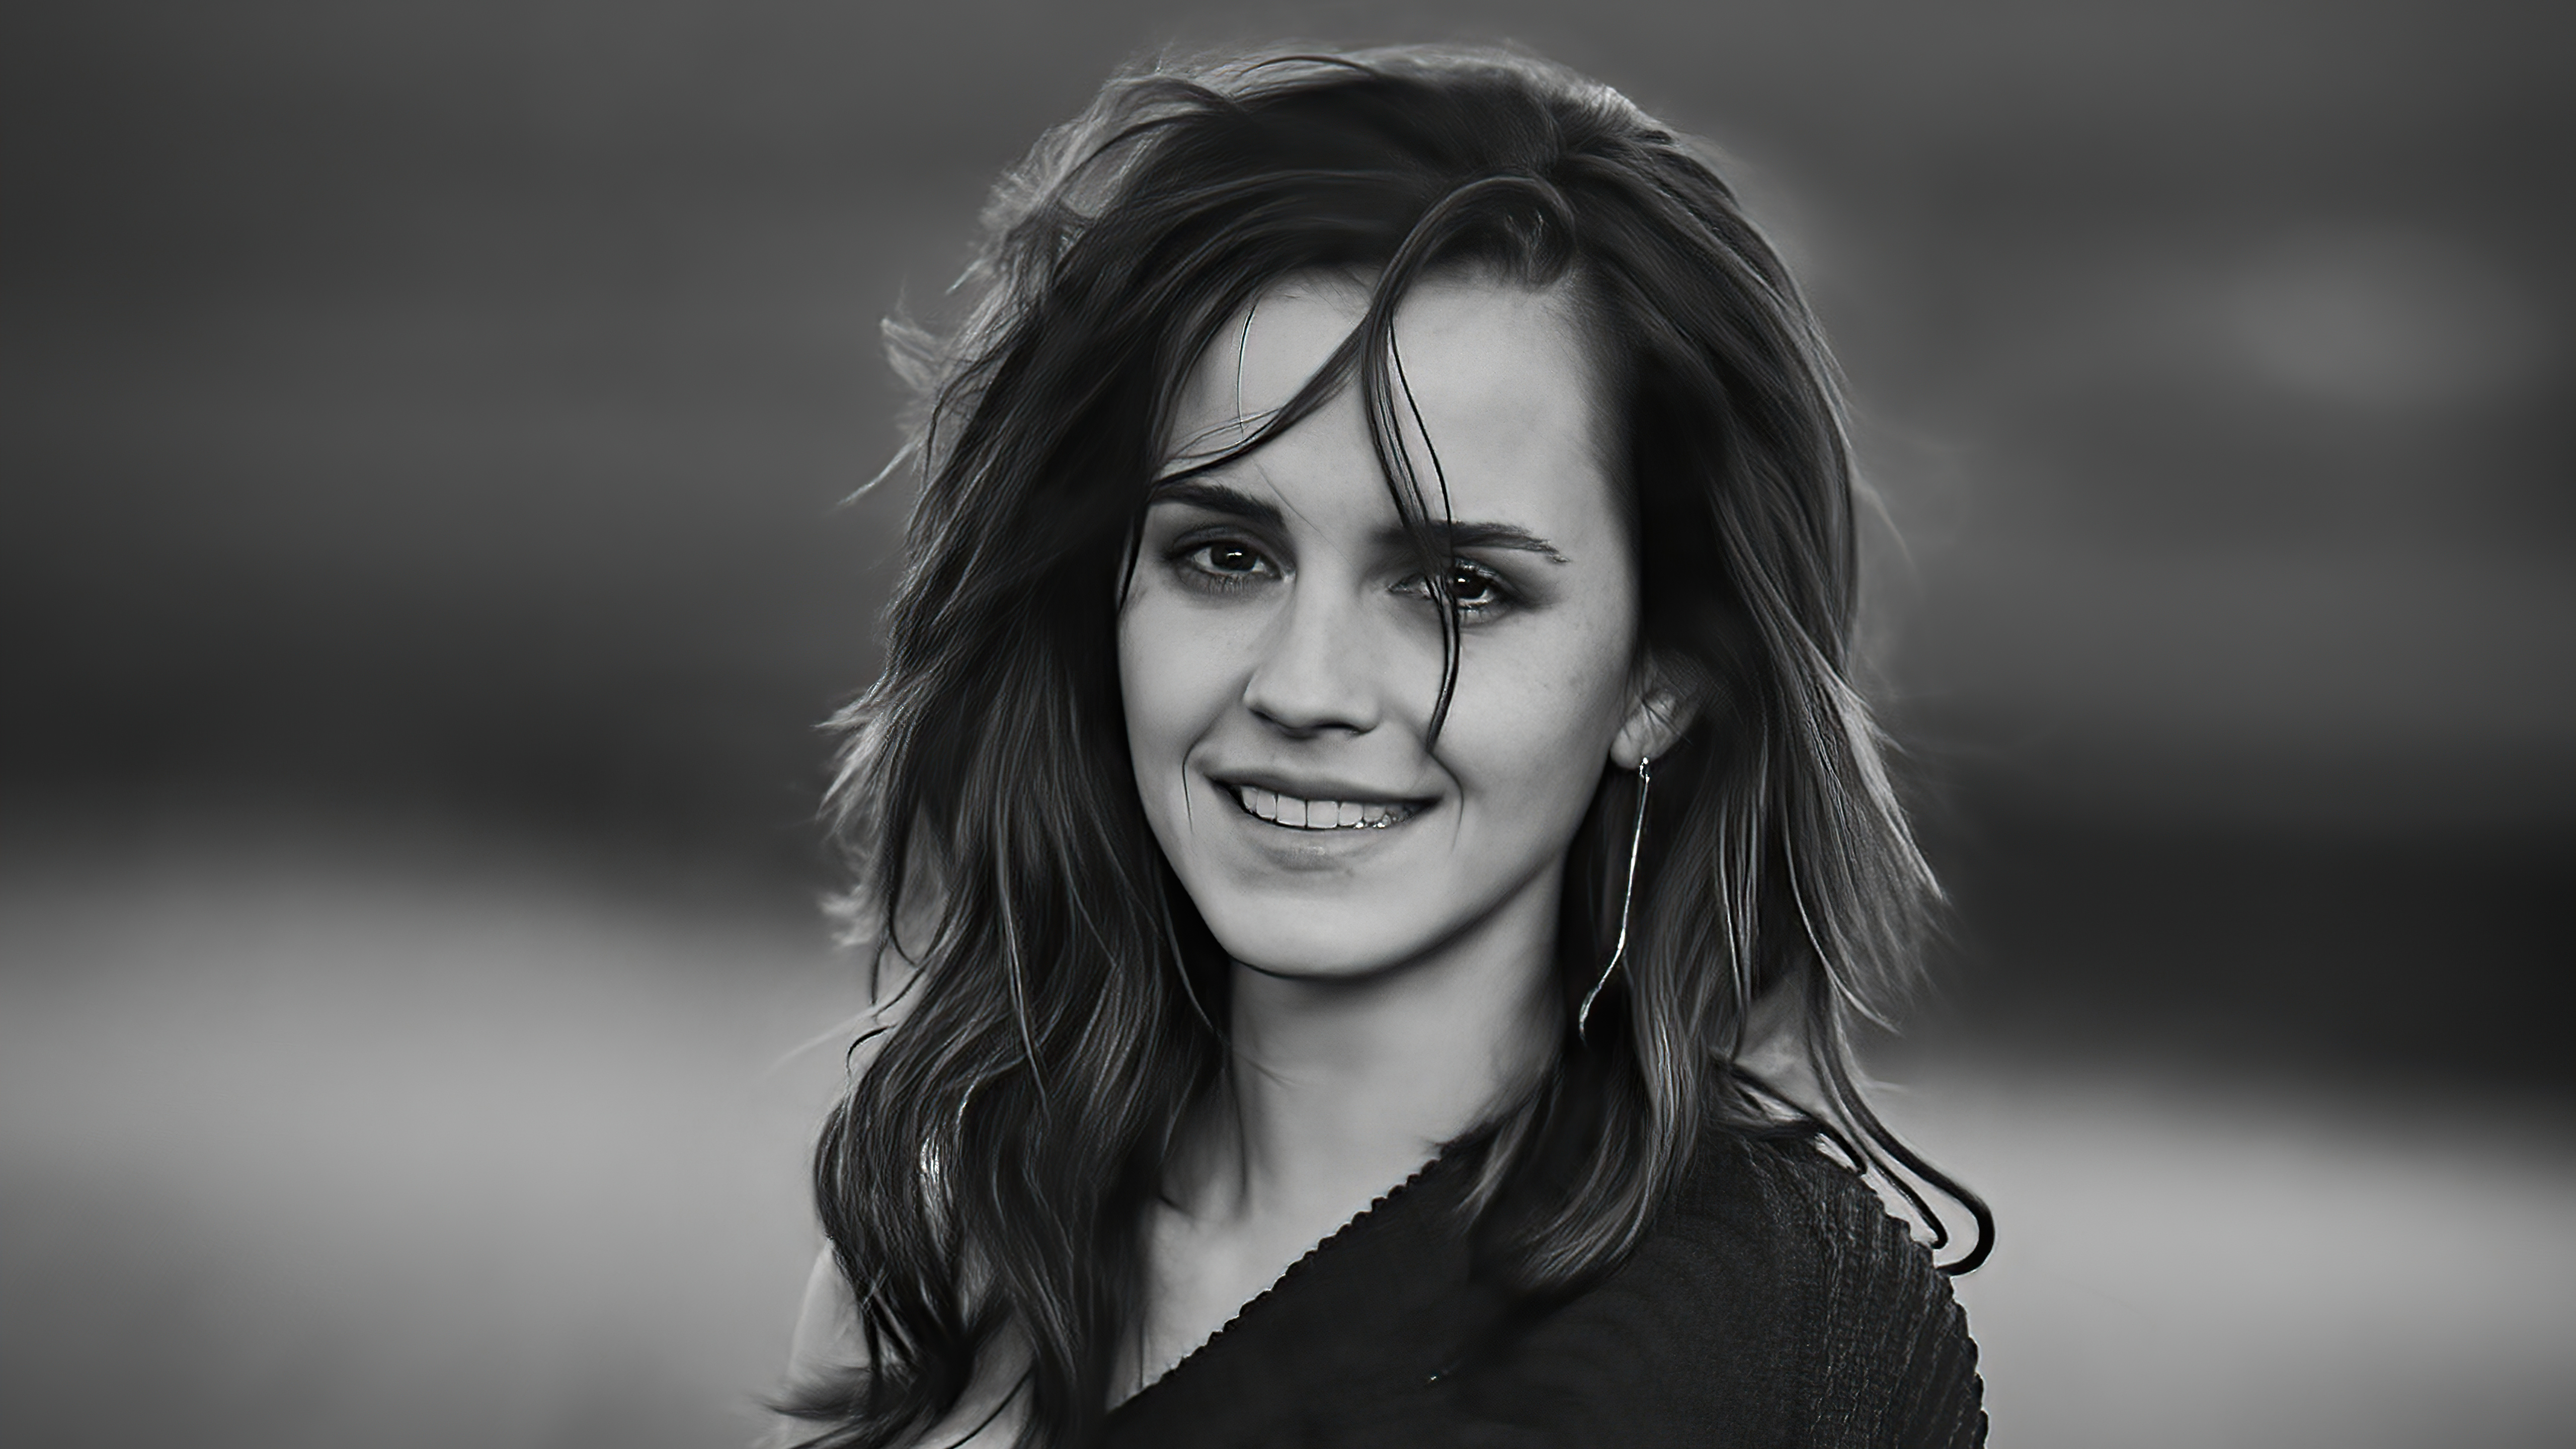 Emma watson monochrome k hd celebrities k wallpapers images backgrounds photos and pictures